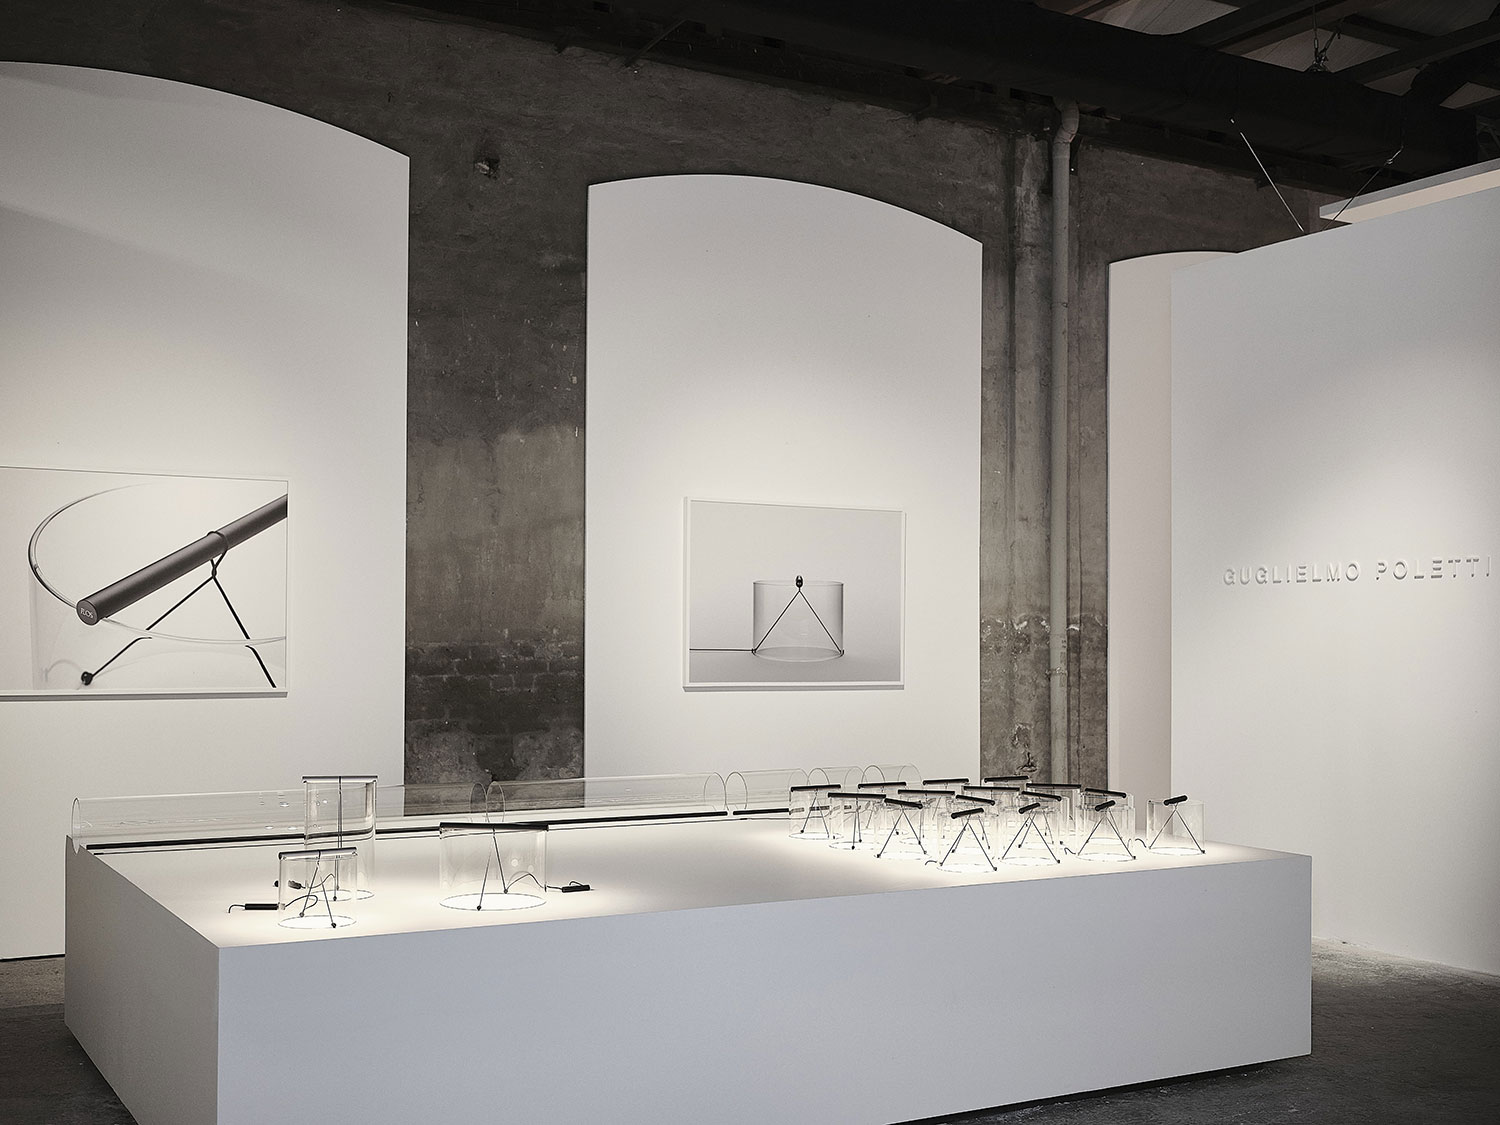 Installation view of the To-Tie lamps